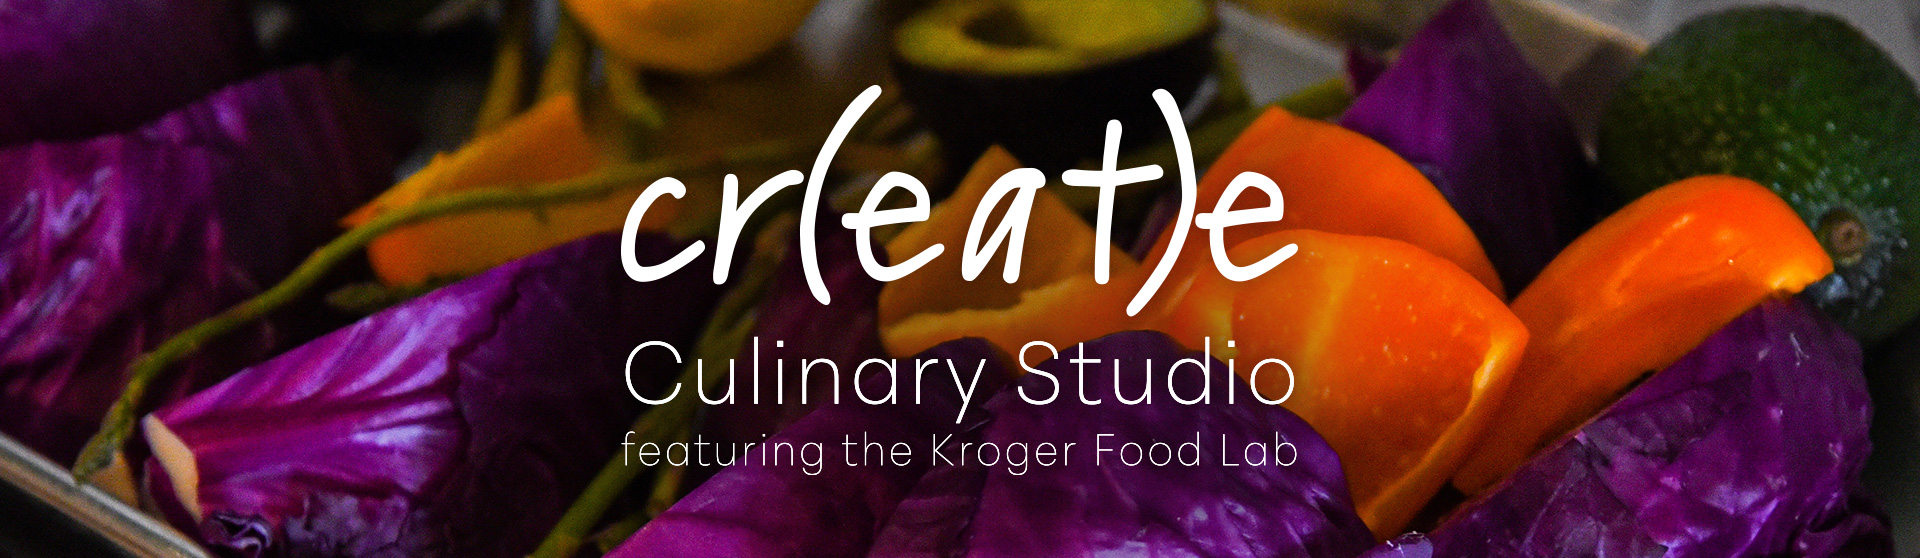 Cr(EAT)e Culinary Studio featuring the Kroger Food Lab. Image of an assortment of vegetables featuring orange peppers, avocado, asparagus, and purple cabbage